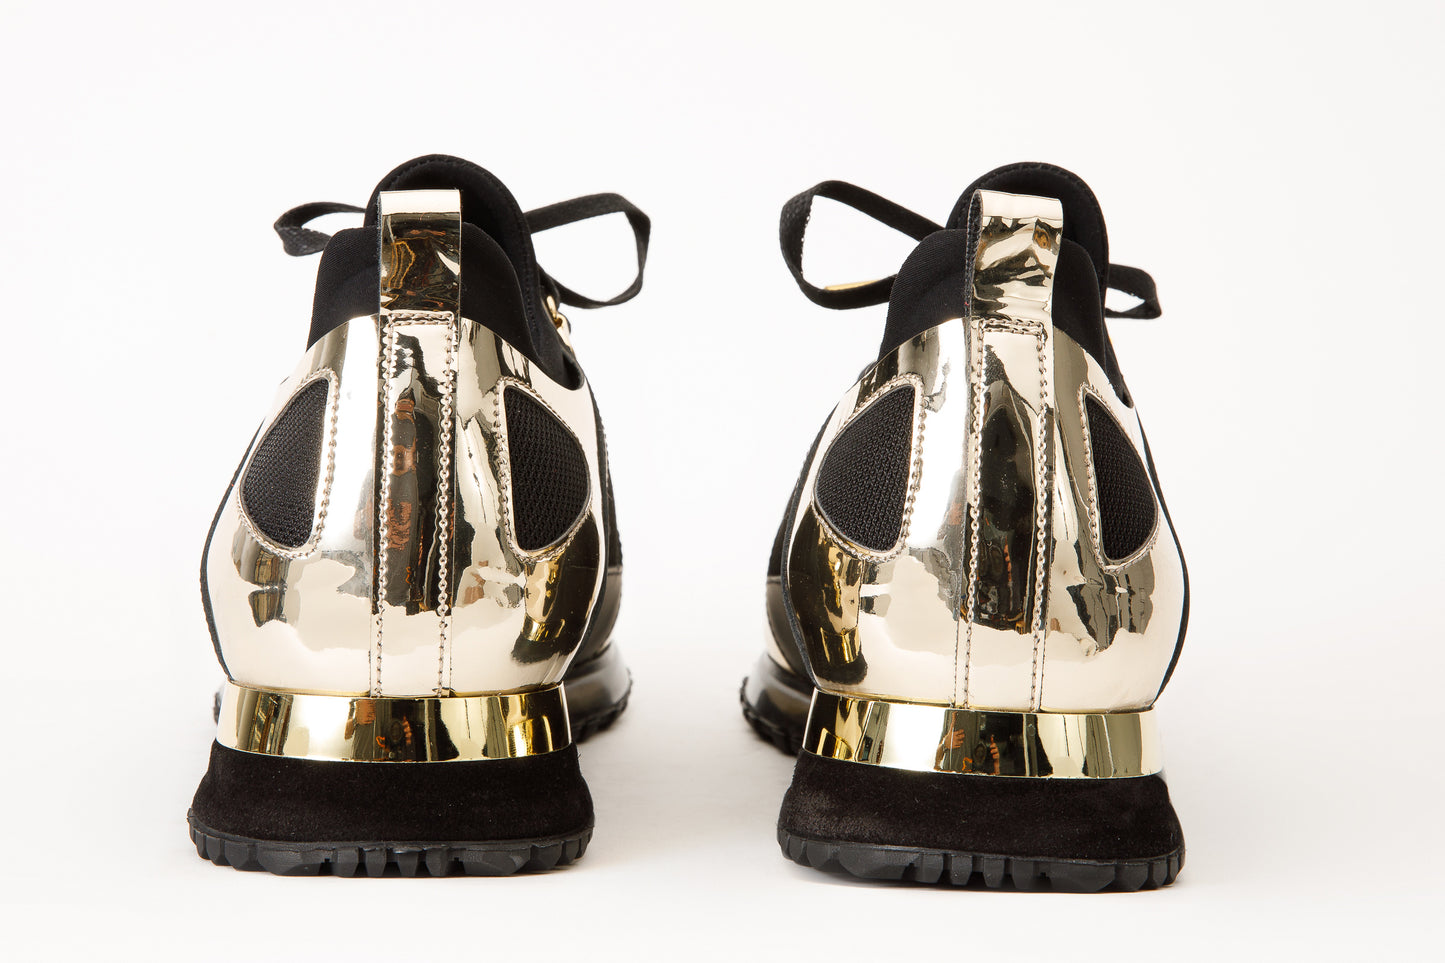 The Emir Gold Leather Men Sneaker Limited Edition